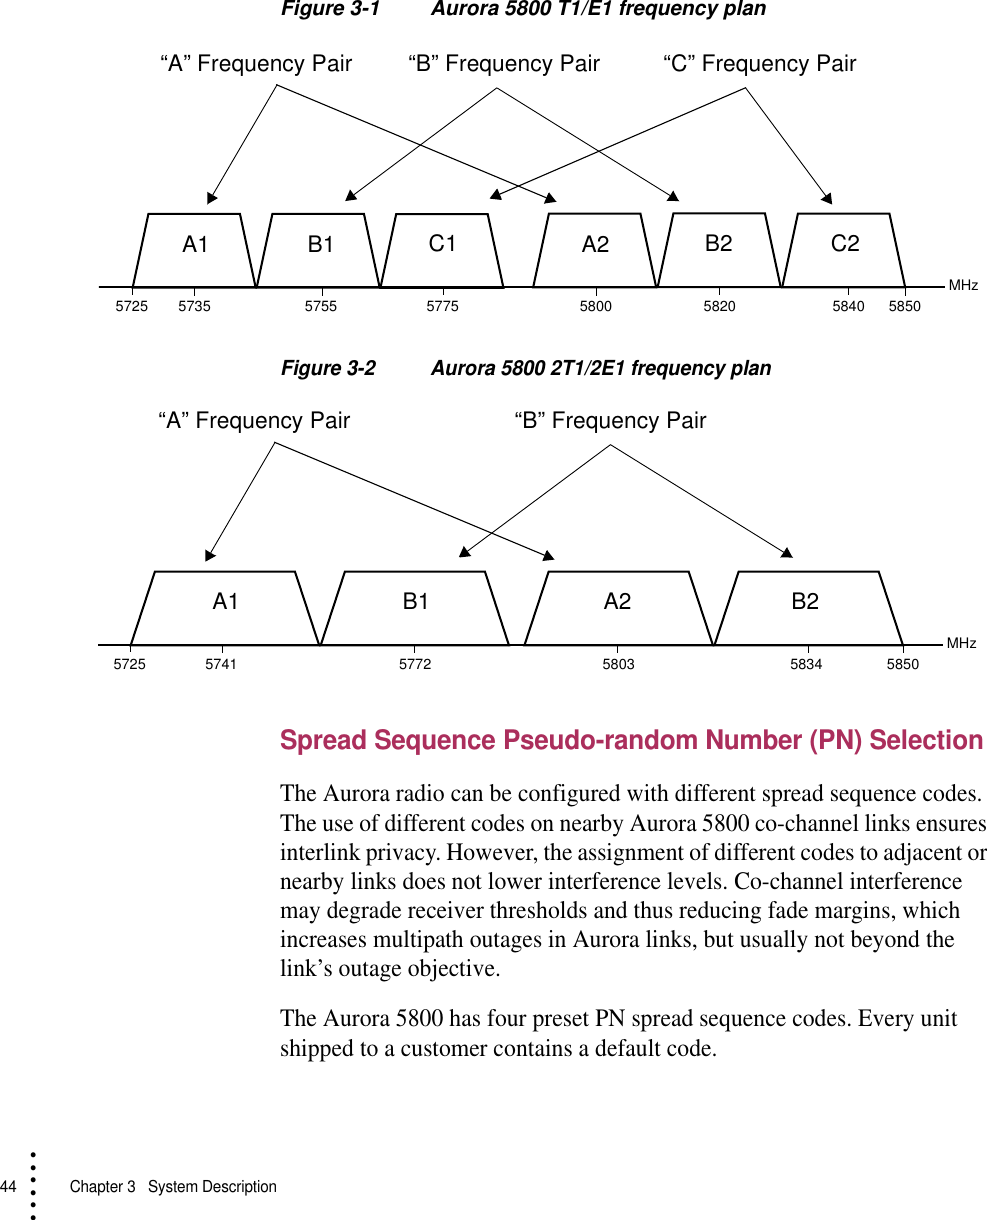 44   Chapter 3  System Description• • • •••Figure 3-1 Aurora 5800 T1/E1 frequency planFigure 3-2 Aurora 5800 2T1/2E1 frequency planSpread Sequence Pseudo-random Number (PN) SelectionThe Aurora radio can be configured with different spread sequence codes. The use of different codes on nearby Aurora 5800 co-channel links ensures interlink privacy. However, the assignment of different codes to adjacent or nearby links does not lower interference levels. Co-channel interference may degrade receiver thresholds and thus reducing fade margins, which increases multipath outages in Aurora links, but usually not beyond the link’s outage objective.The Aurora 5800 has four preset PN spread sequence codes. Every unit shipped to a customer contains a default code.A1 B1 A2 B25725“A” Frequency Pair “B” Frequency PairC1 C2MHz5735 5755 5775 5800 5820 5840 5850“C” Frequency PairA1 B1 A2 B25725“A” Frequency Pair “B” Frequency PairMHz5741 5772 5803 5834 5850